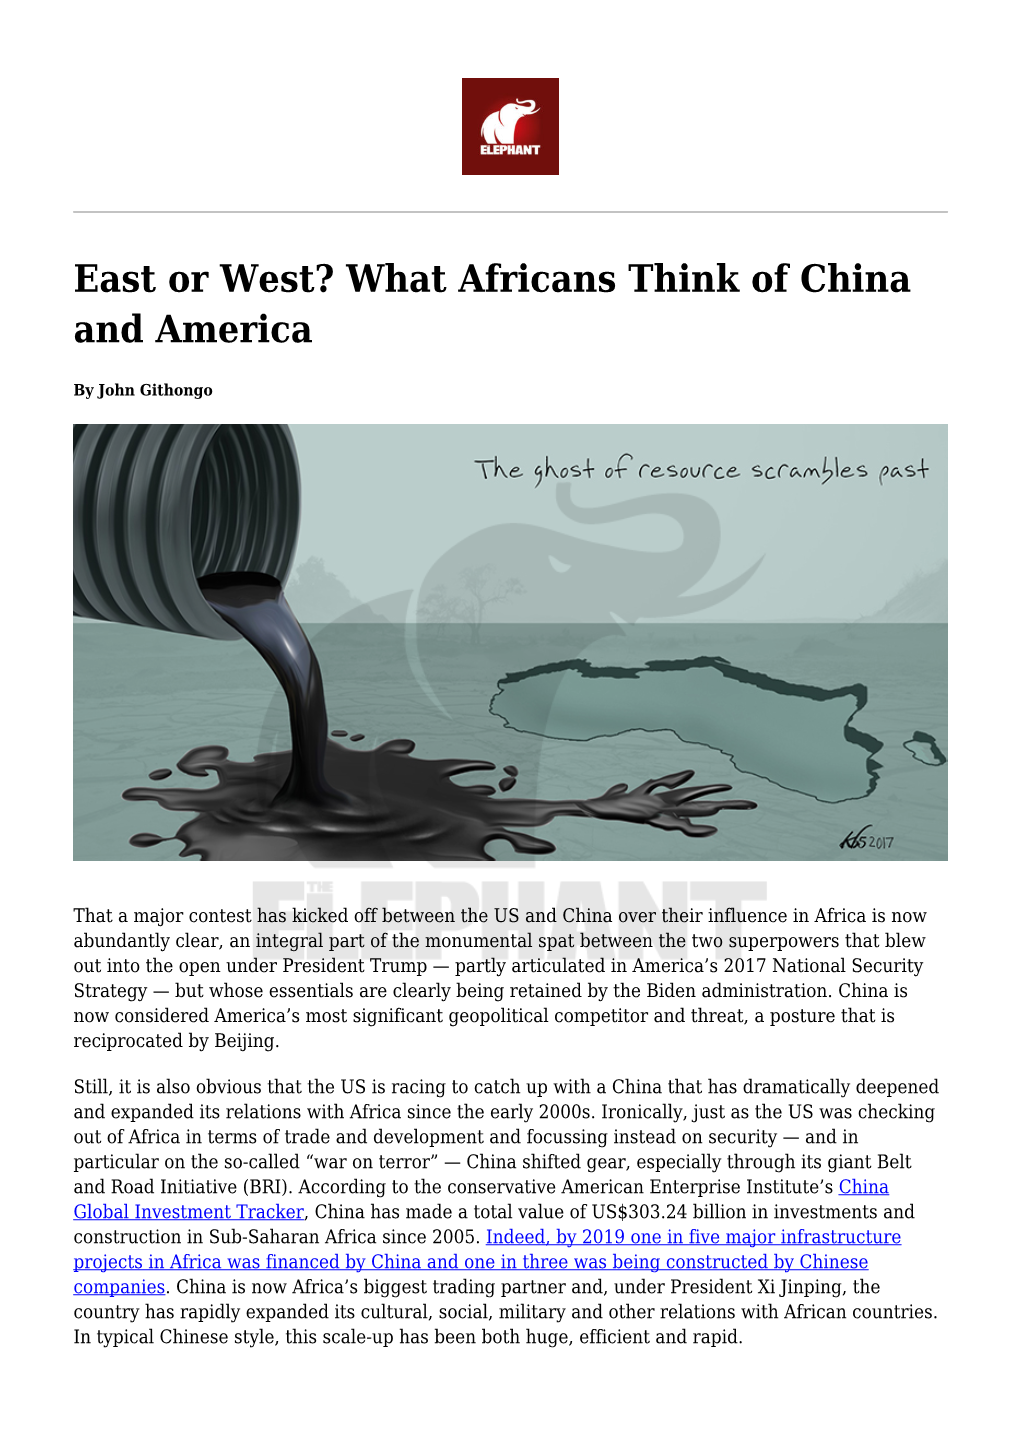 East Or West? What Africans Think of China and America,Between The